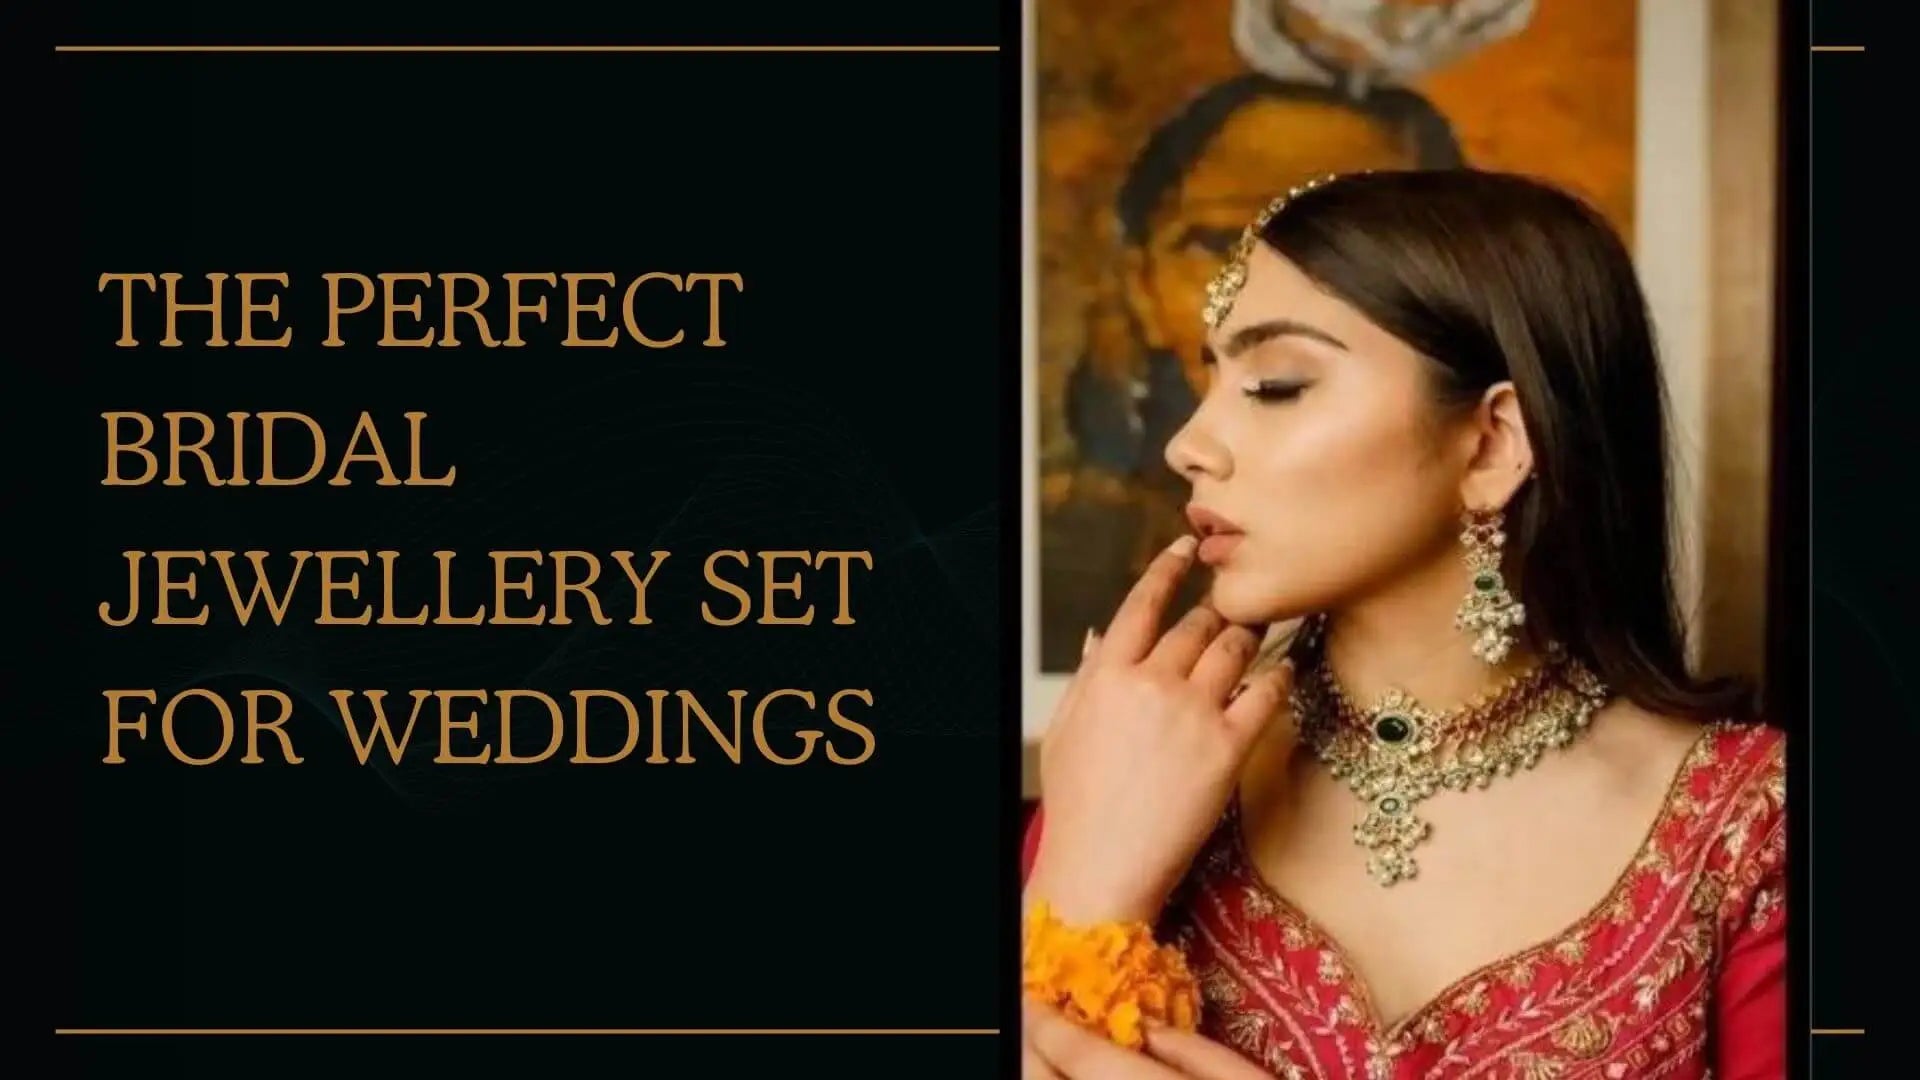 The Perfect Bridal Jewellery Set for Weddings